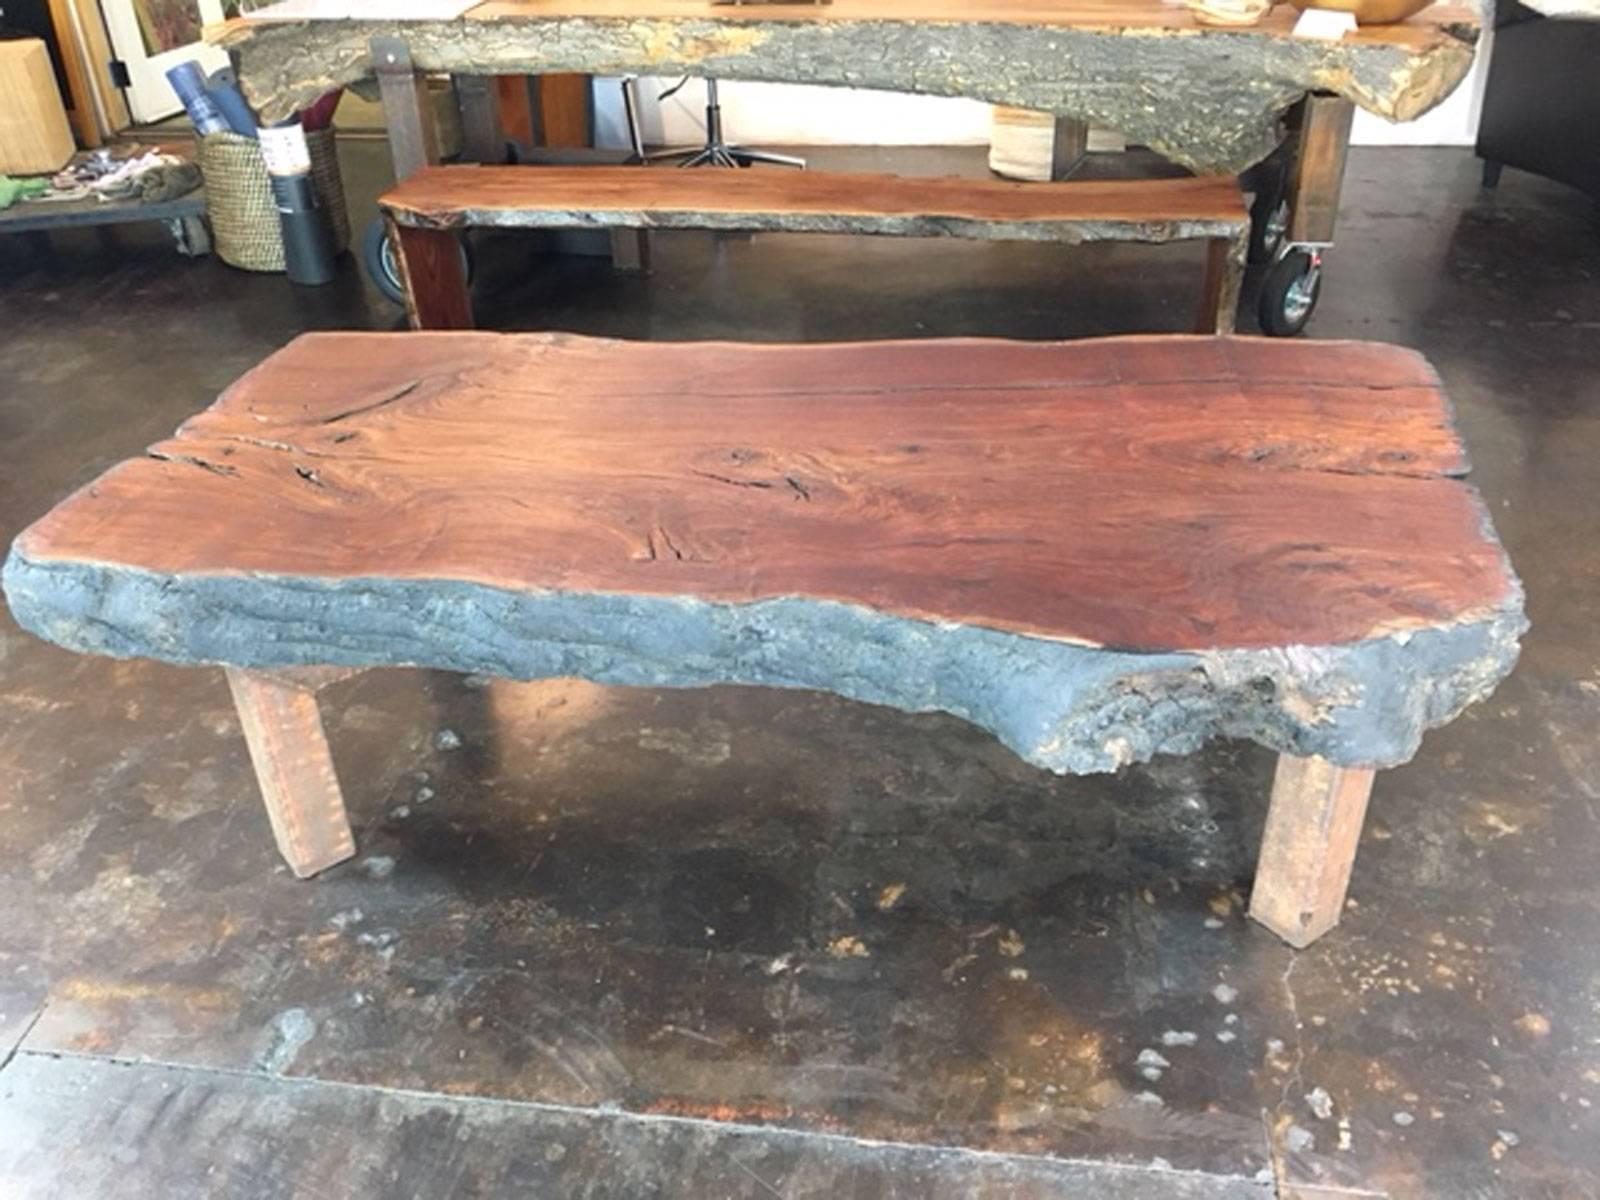 Huge organic shaped coffee table or display table designed, produced and made by master wood artist and designer Scott Mills who only uses reclaimed (deadfall or storm downed trees) in the pieces he designs and produces. This piece is big, solid,